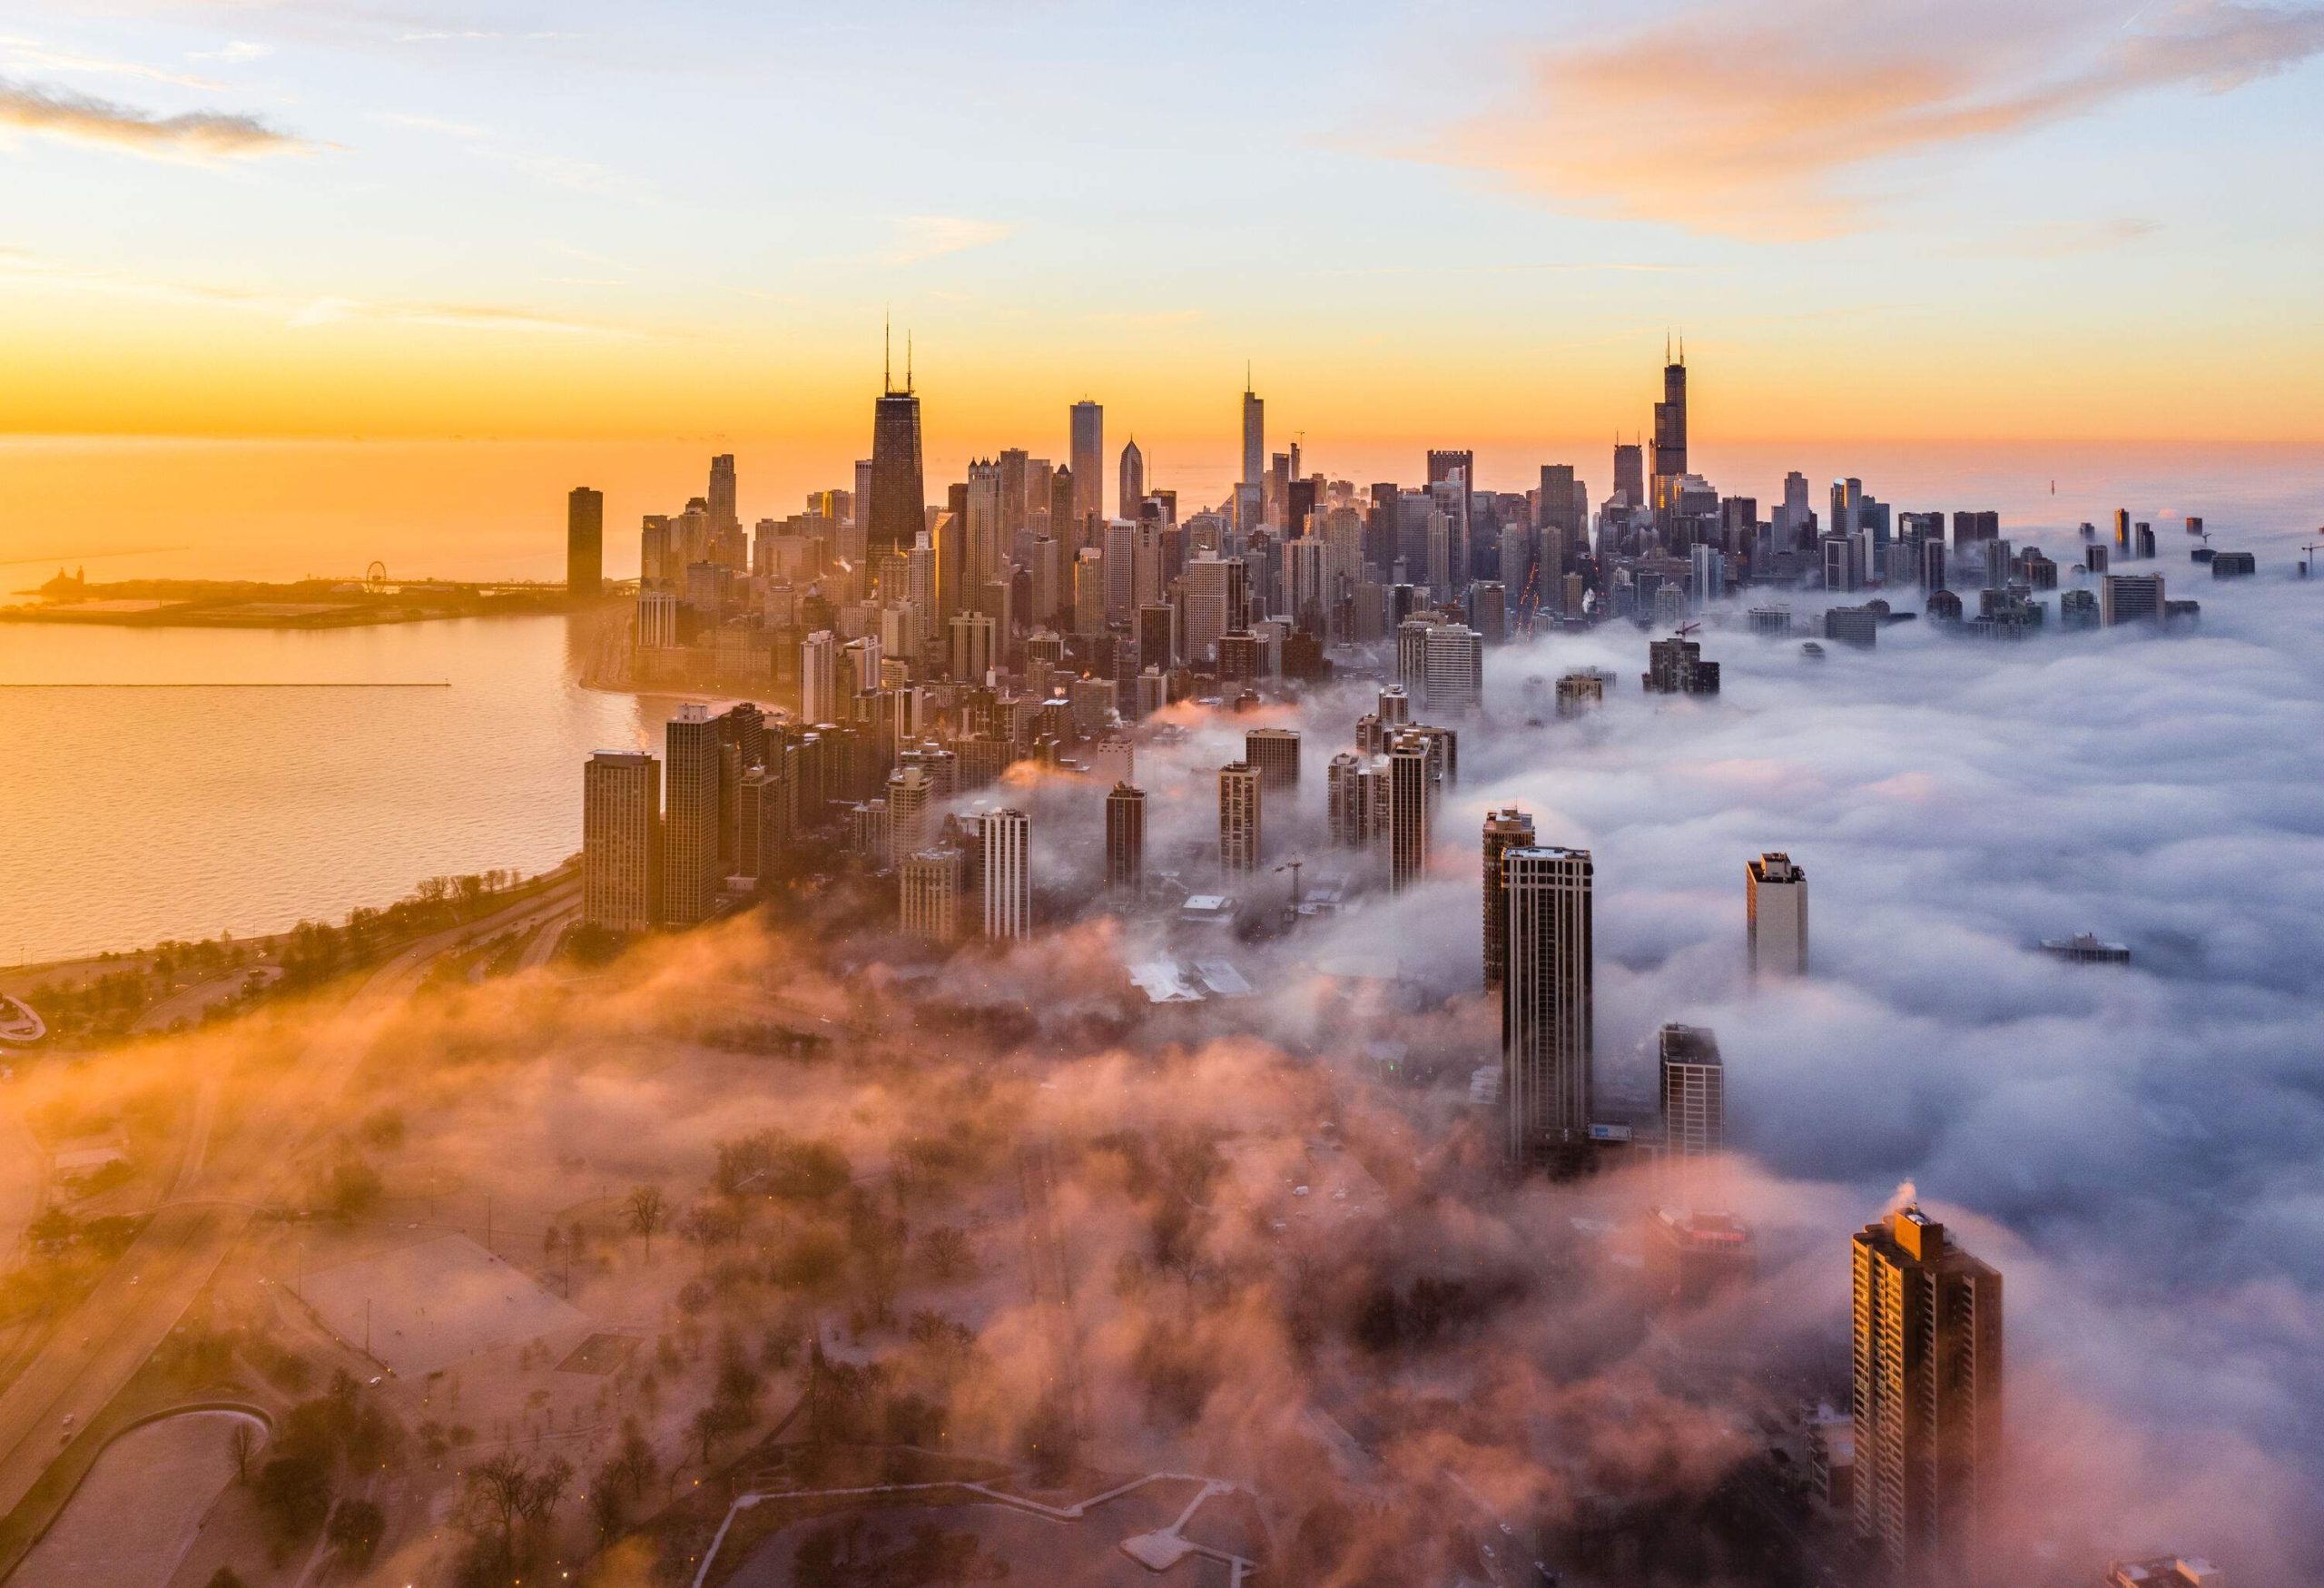 A picturesque skyline of a modern city, featuring towering skyscrapers partially shrouded in a sea of clouds, set against the backdrop of a scenic twilight sky, creating a mesmerizing urban landscape.